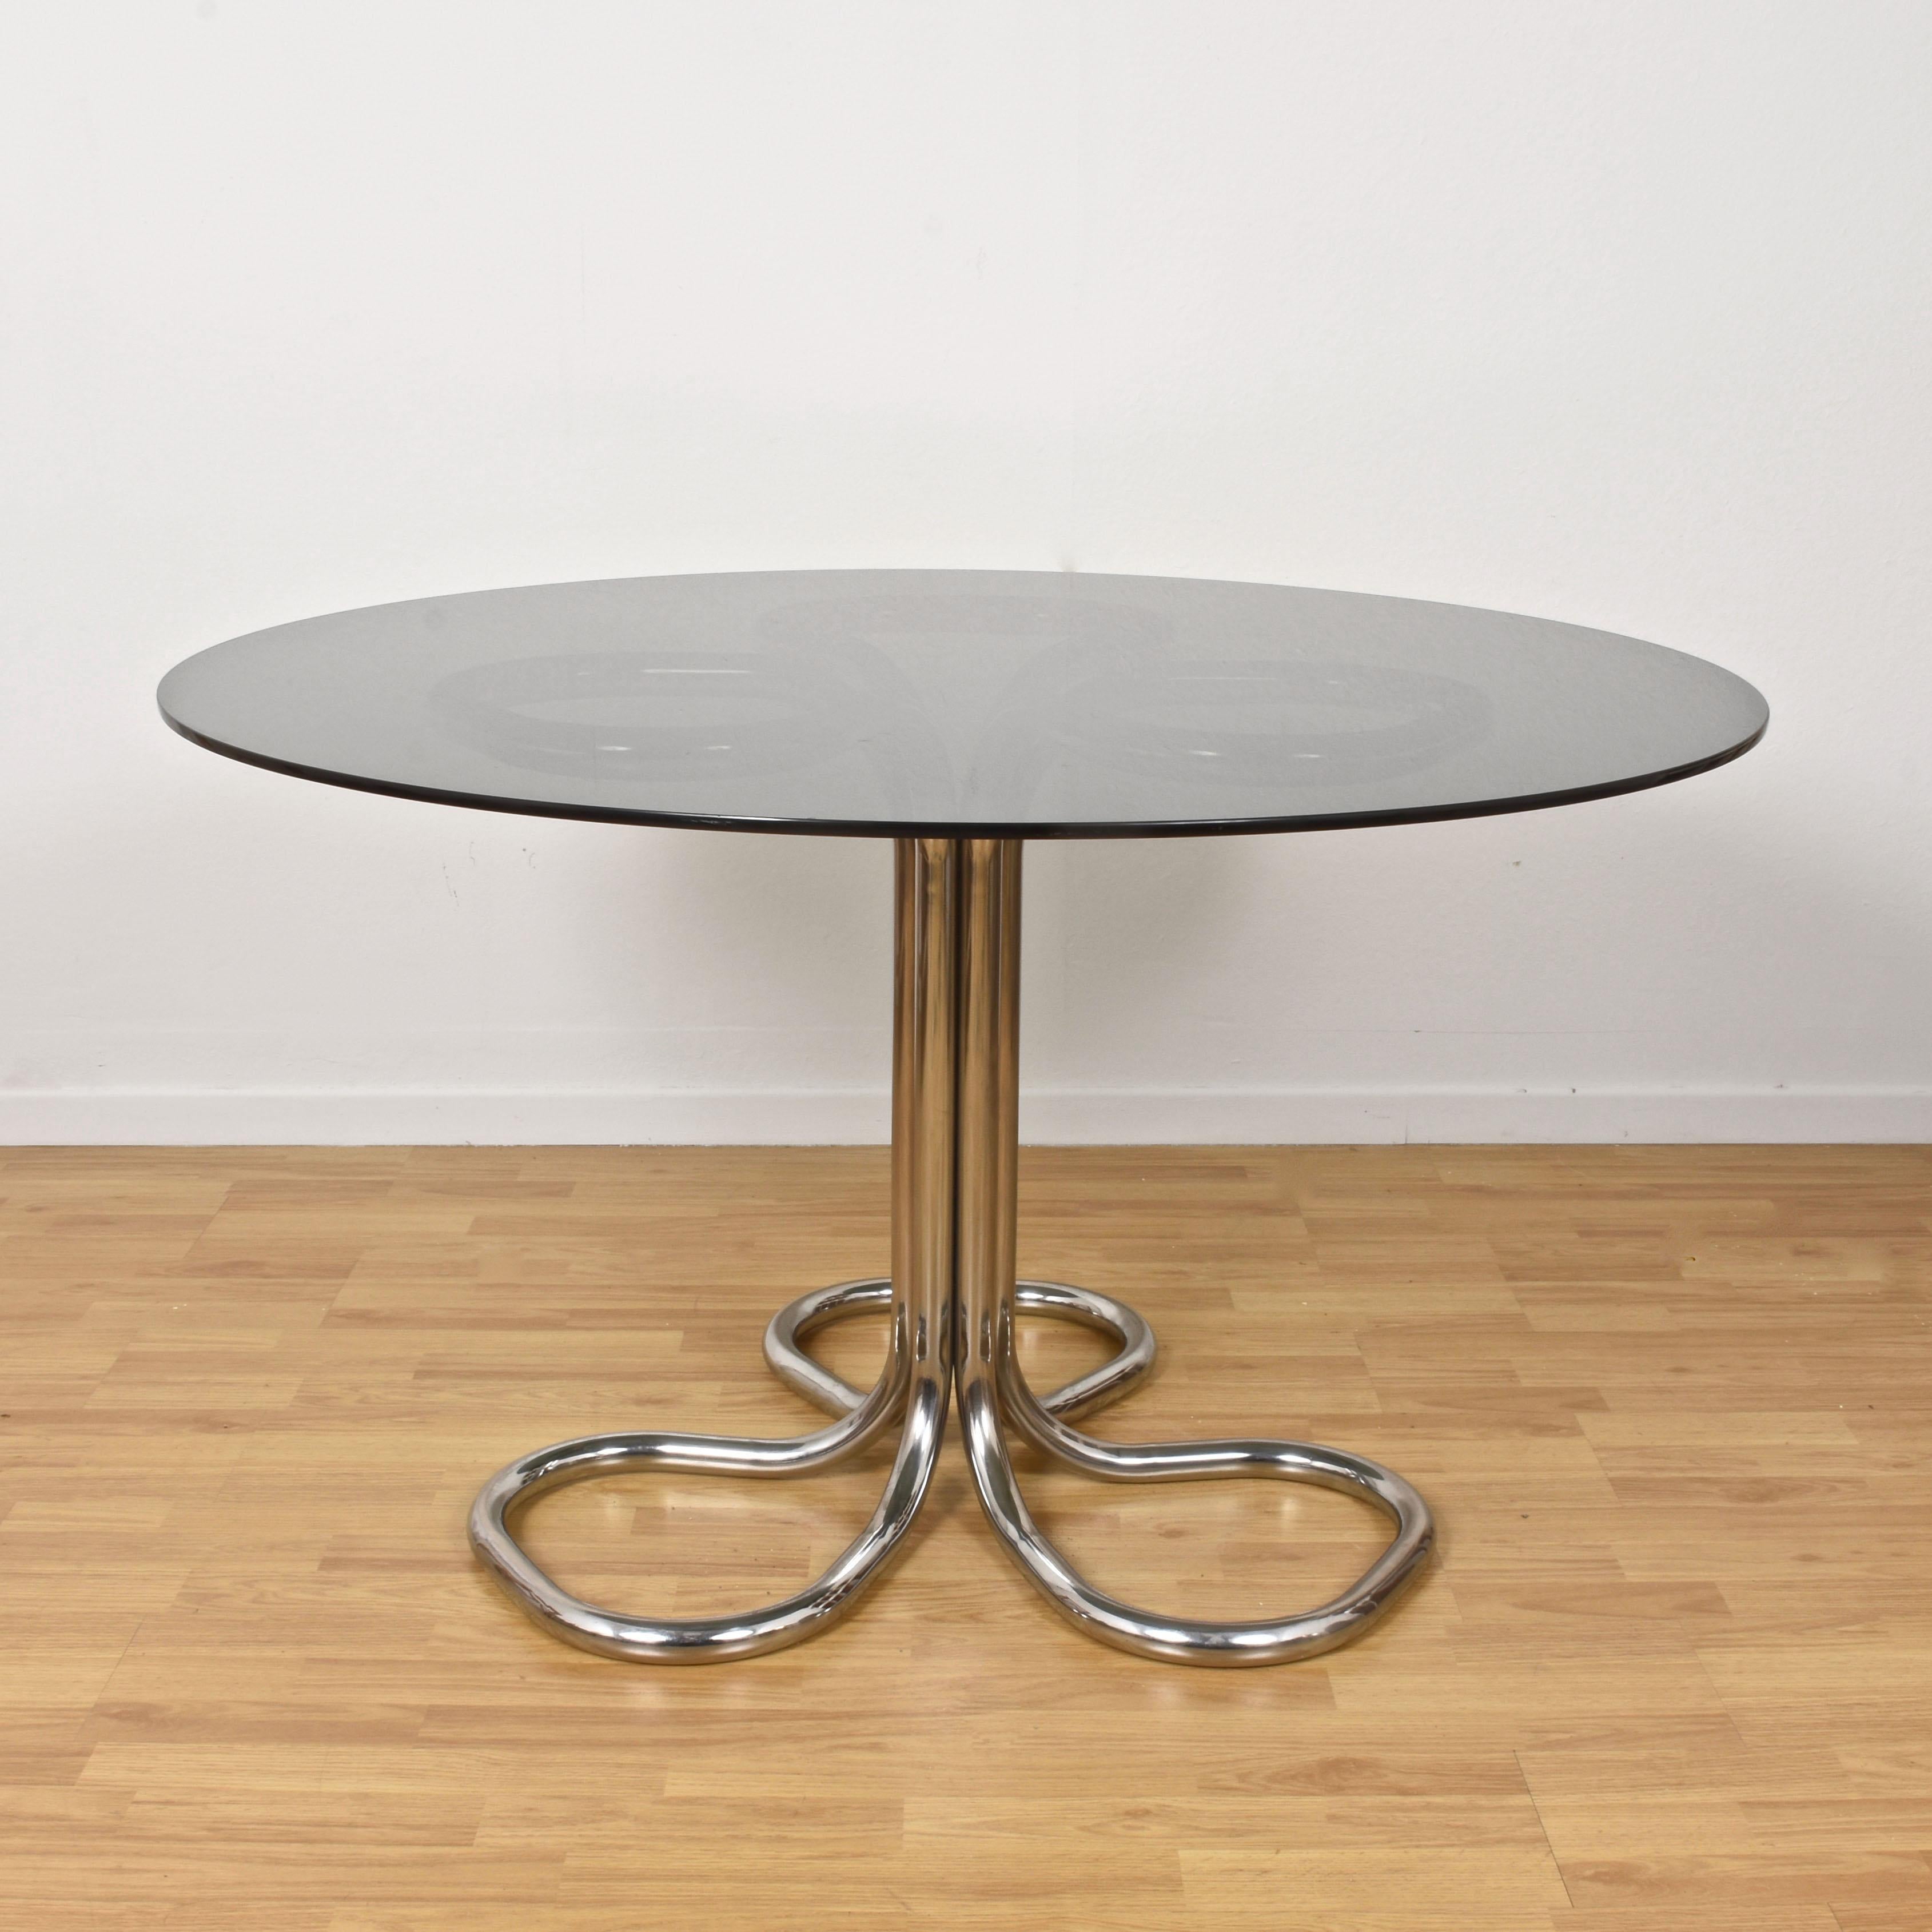 Late 20th Century Italian Chrome Base Smoked Glass Top Dining Table, Giotto Stoppino, Italy, 1970s